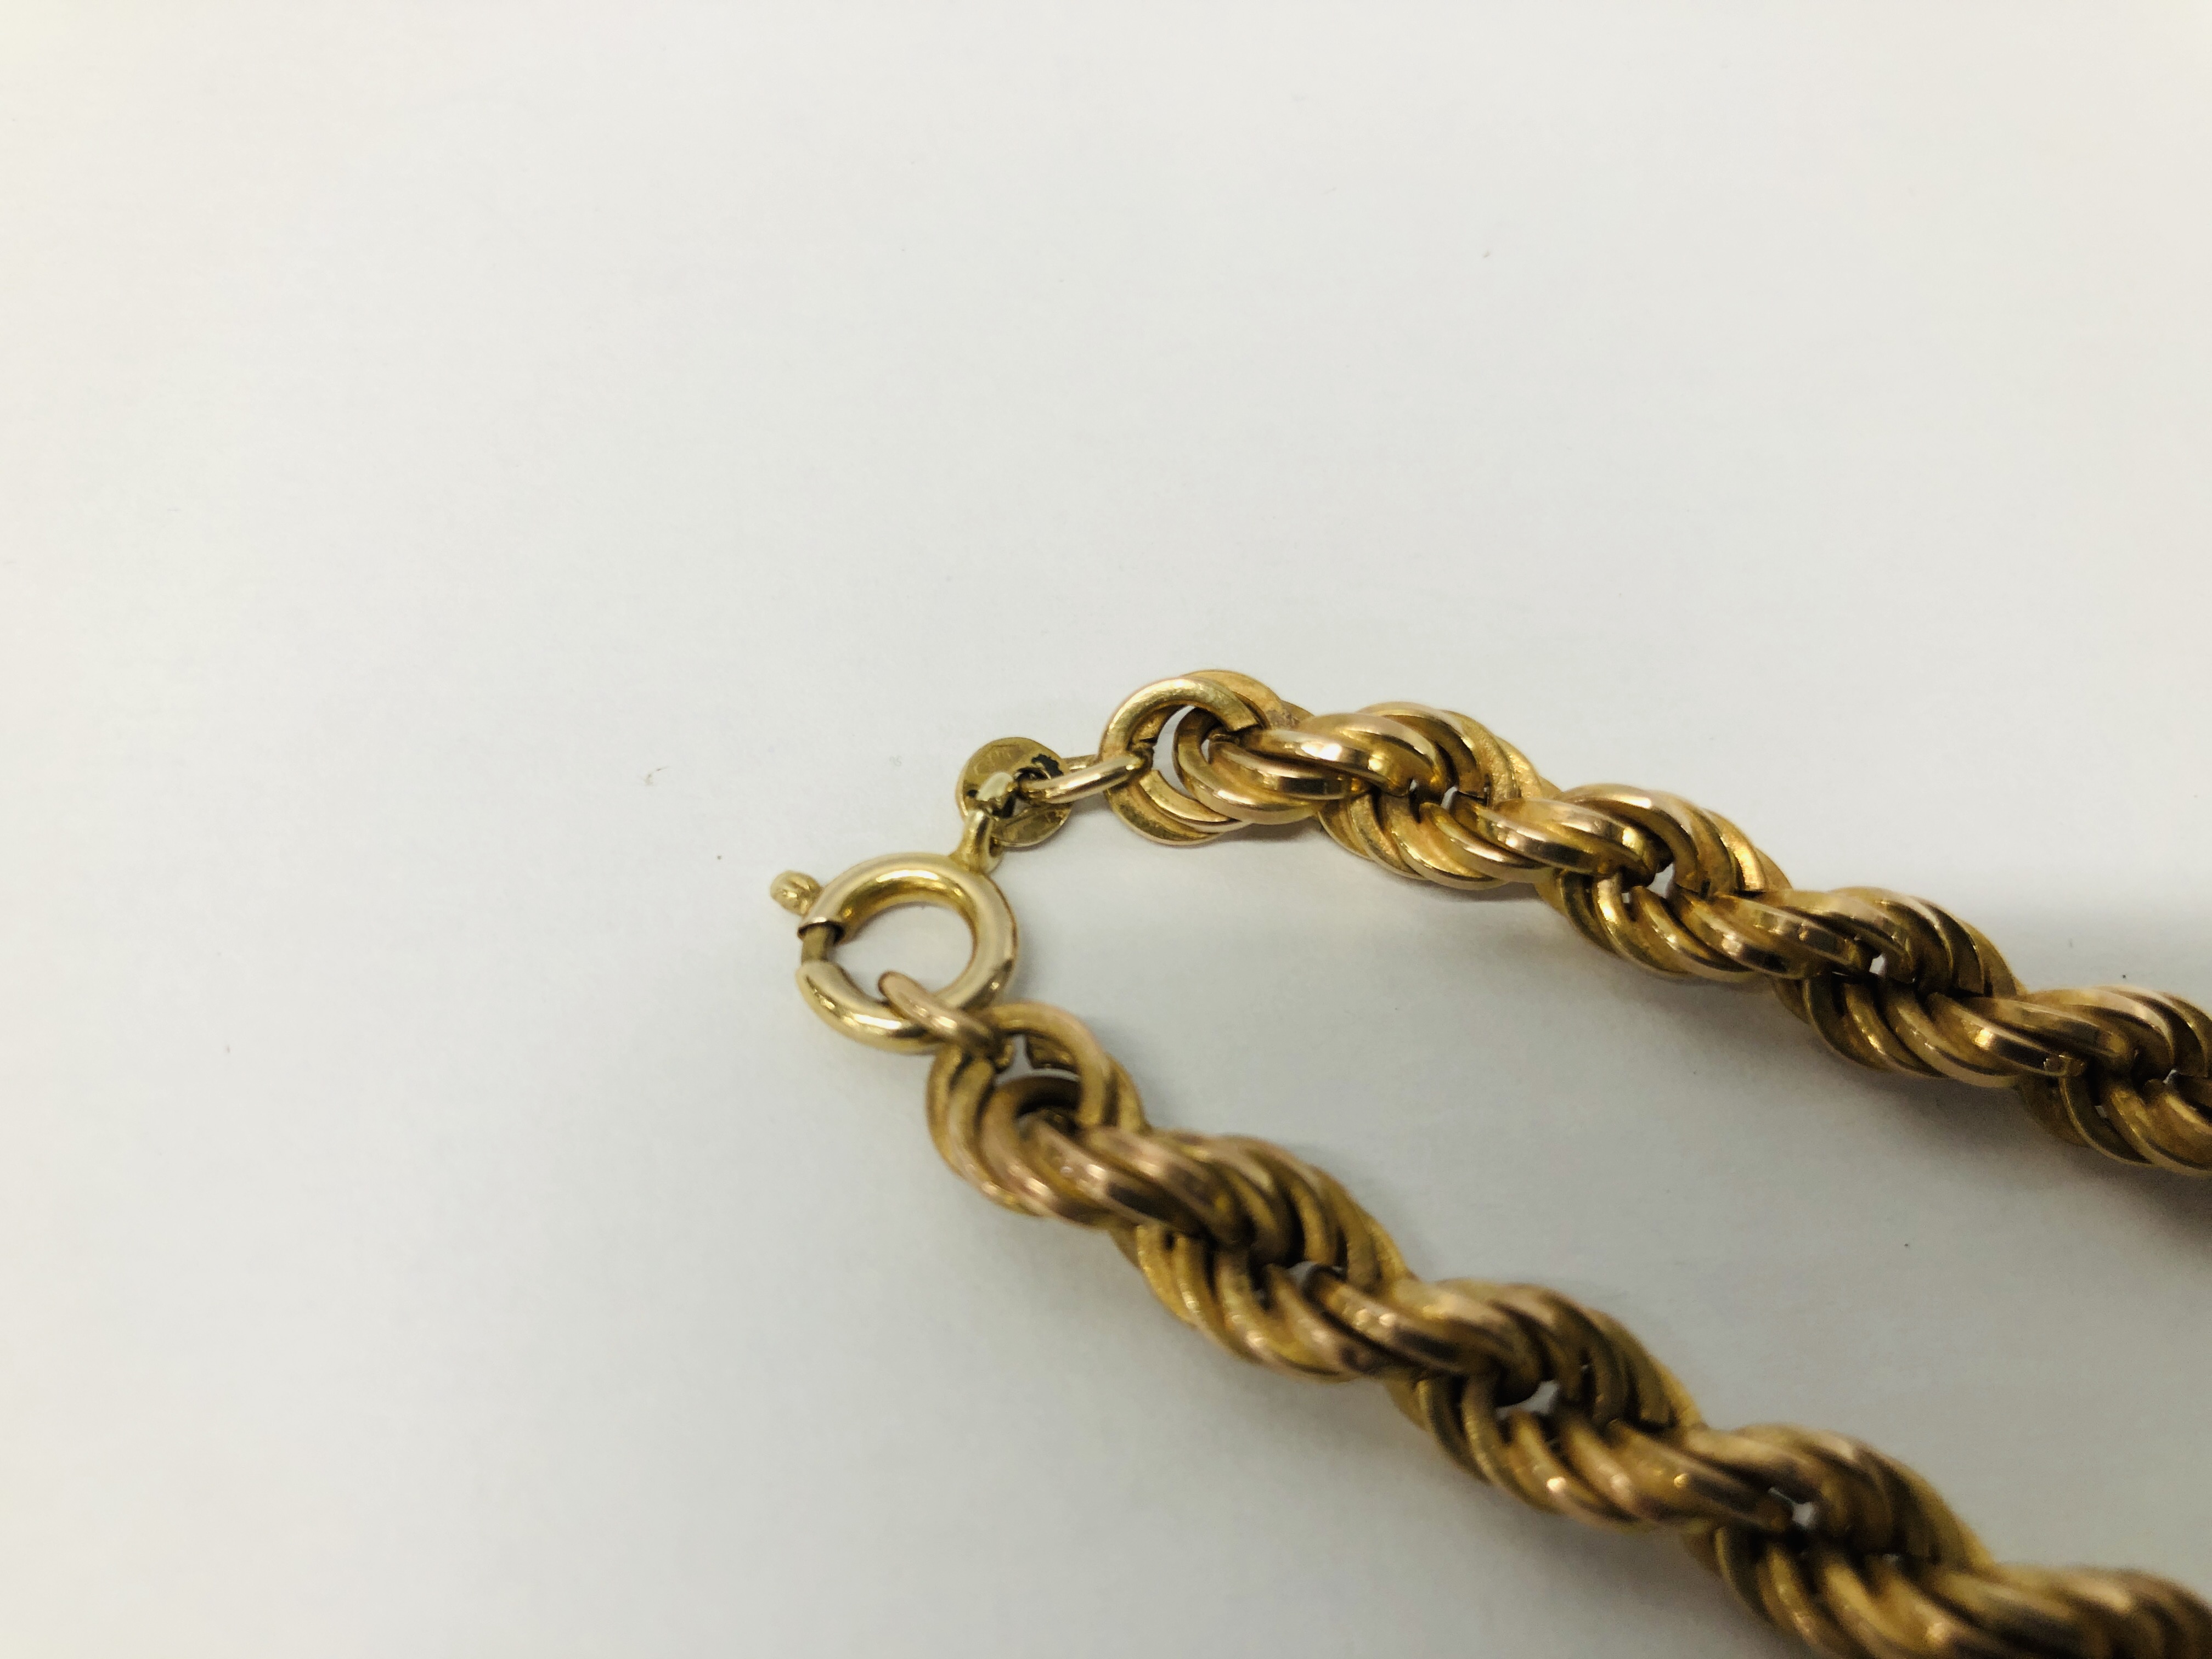 A 9CT GOLD ROPE NECKLACE - LENGTH 60CM - Image 6 of 7